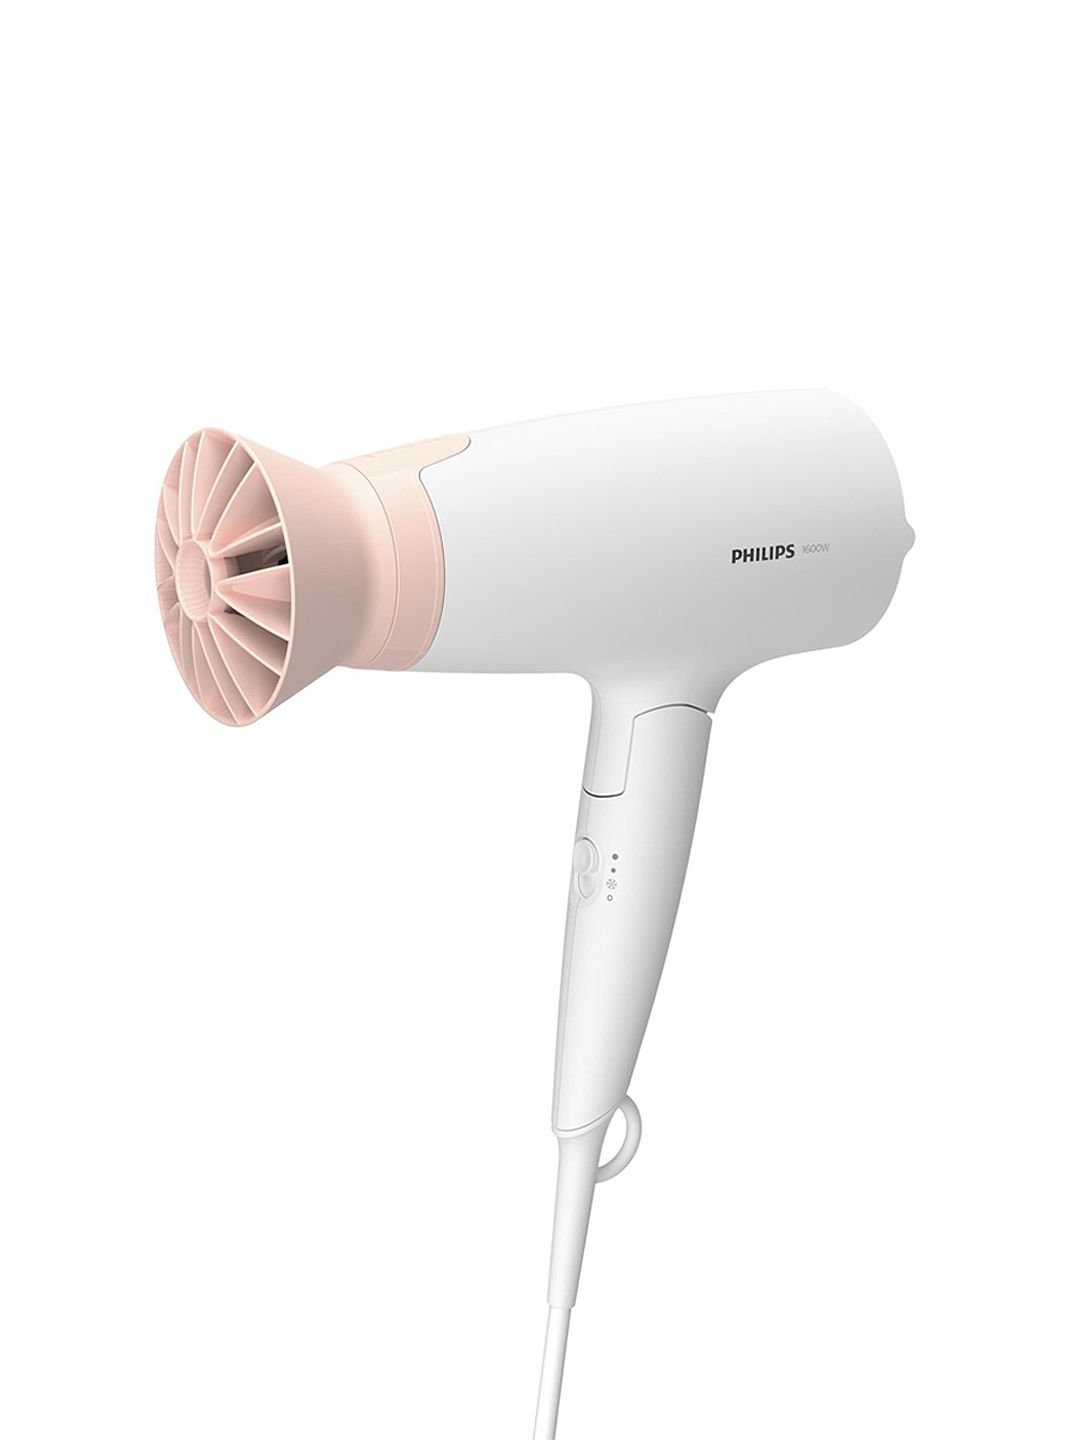 Philips White Thermoprotect Hair Dryer BHD308/30 Price in India